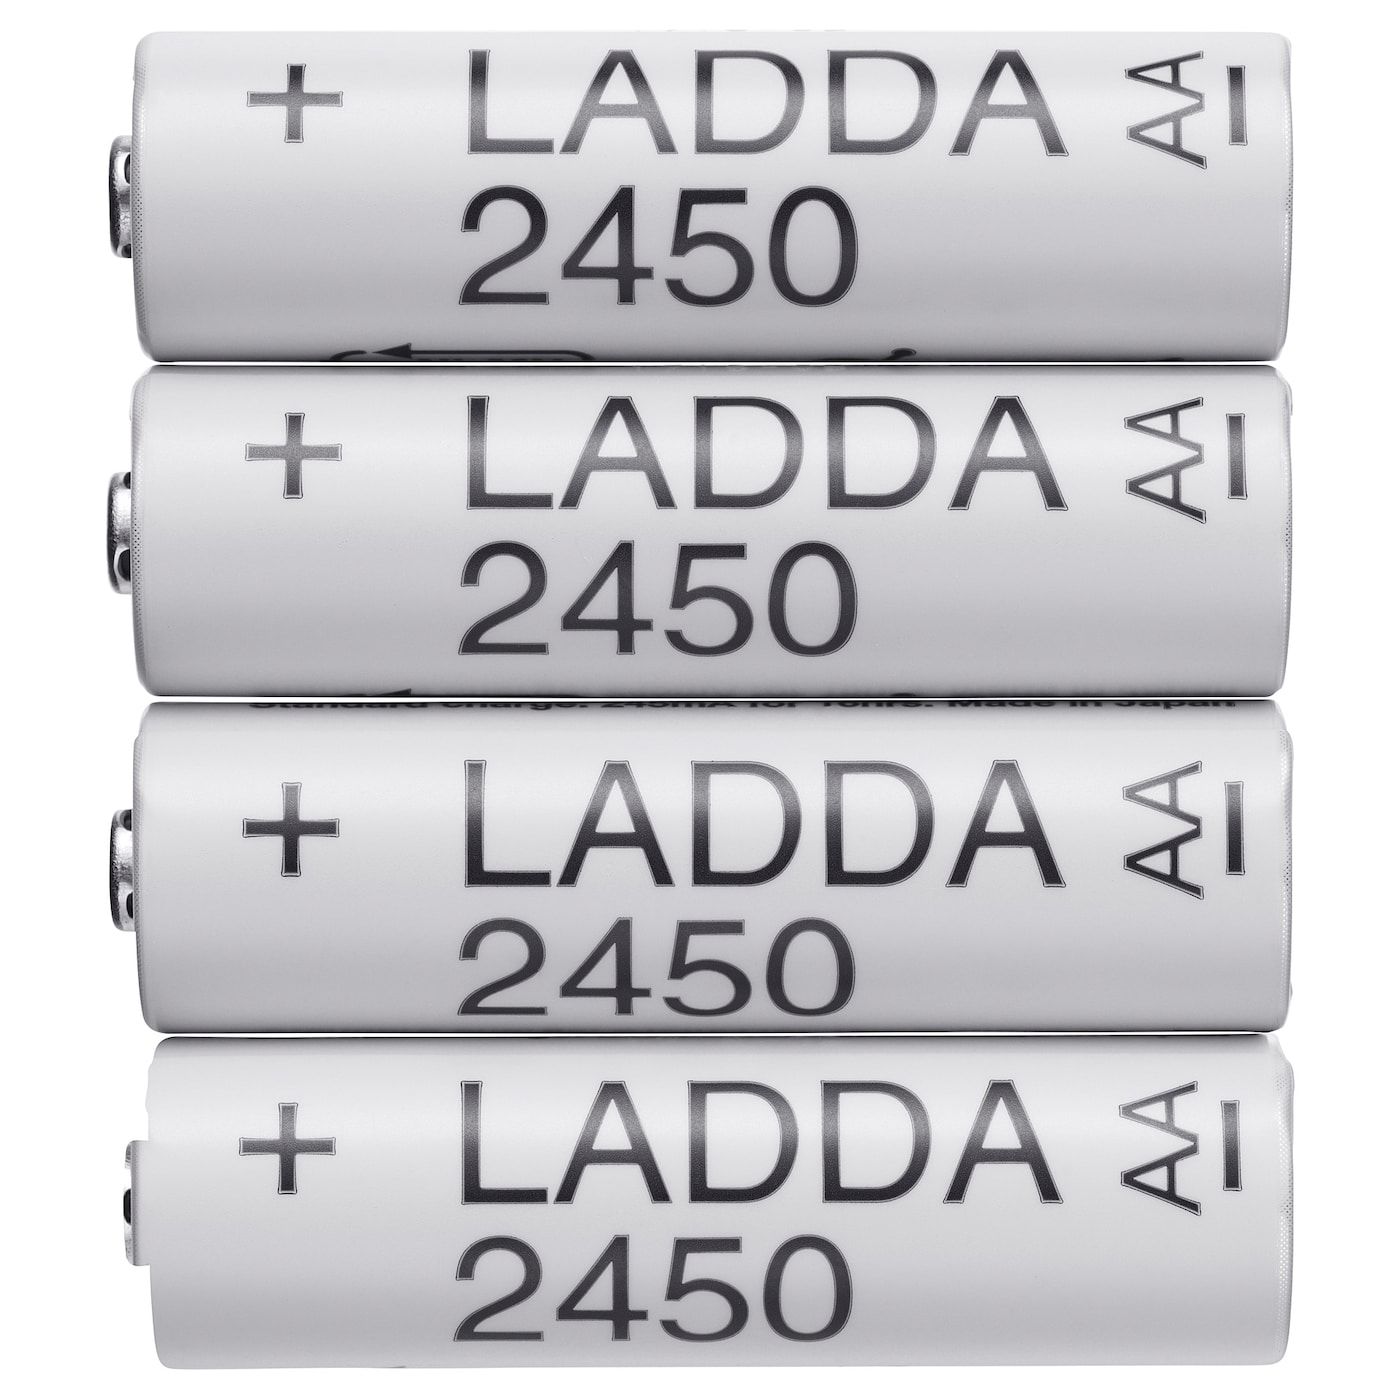 LADDA Rechargeable Battery 